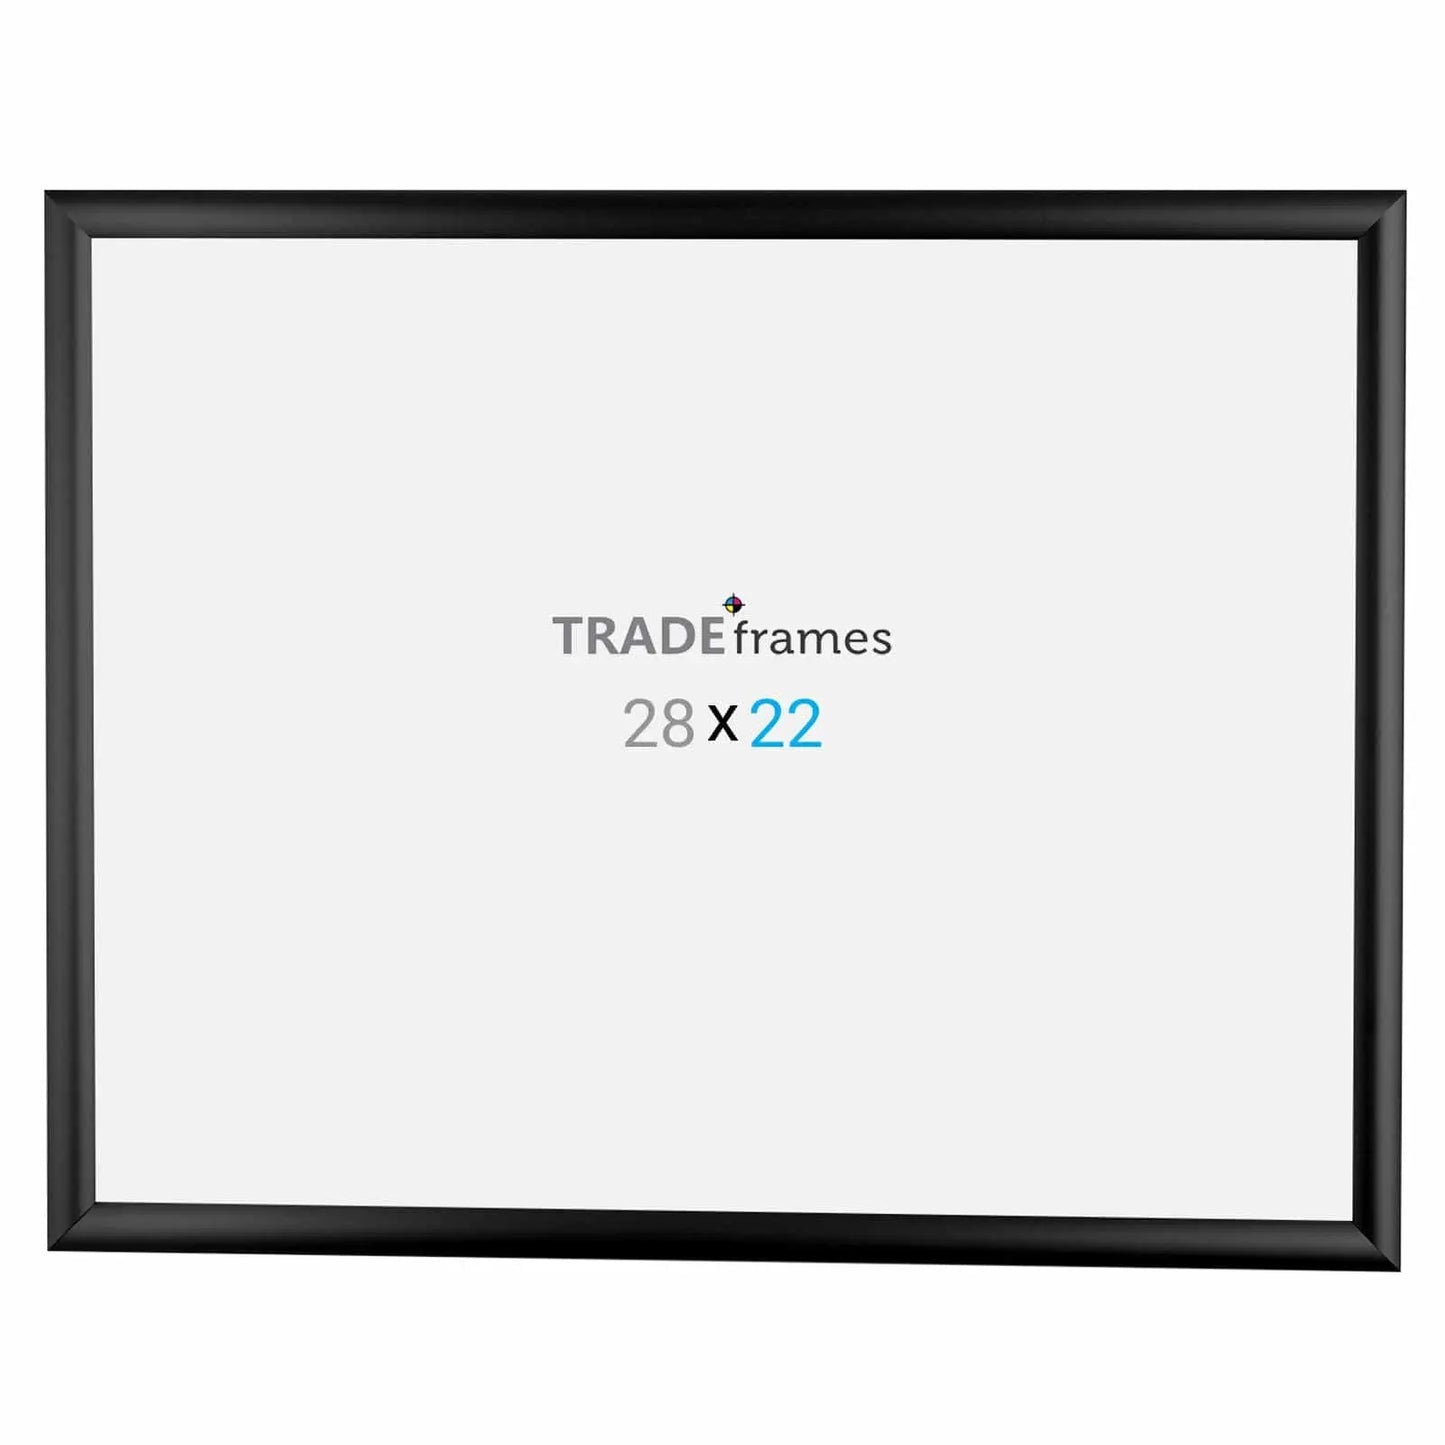 22x28 Inches Black Snap Frame - 1" Profile - Snap Frames Direct